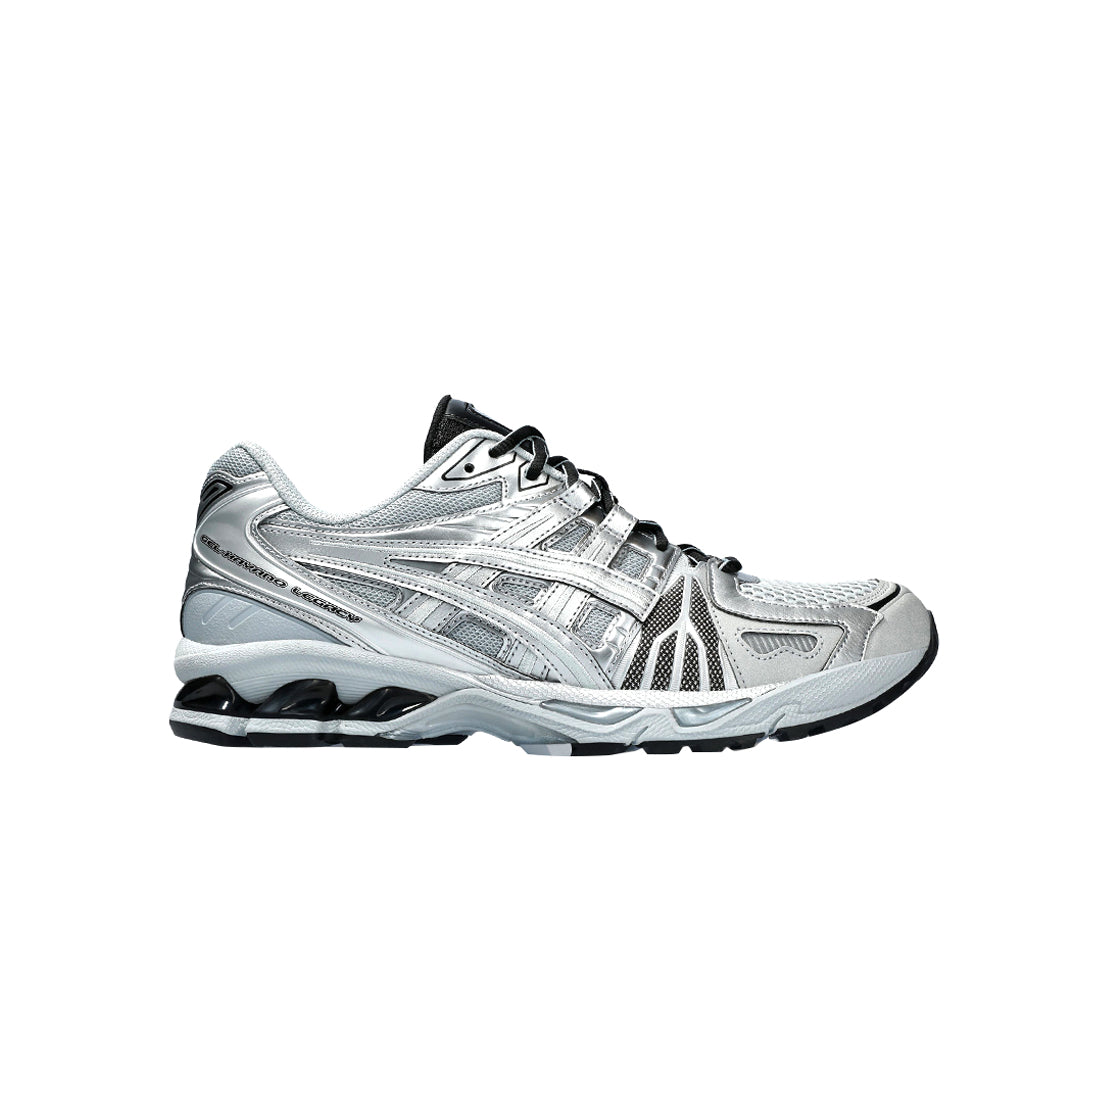 Gel-Kayano Legacy - Pure Silver/Pure Silver